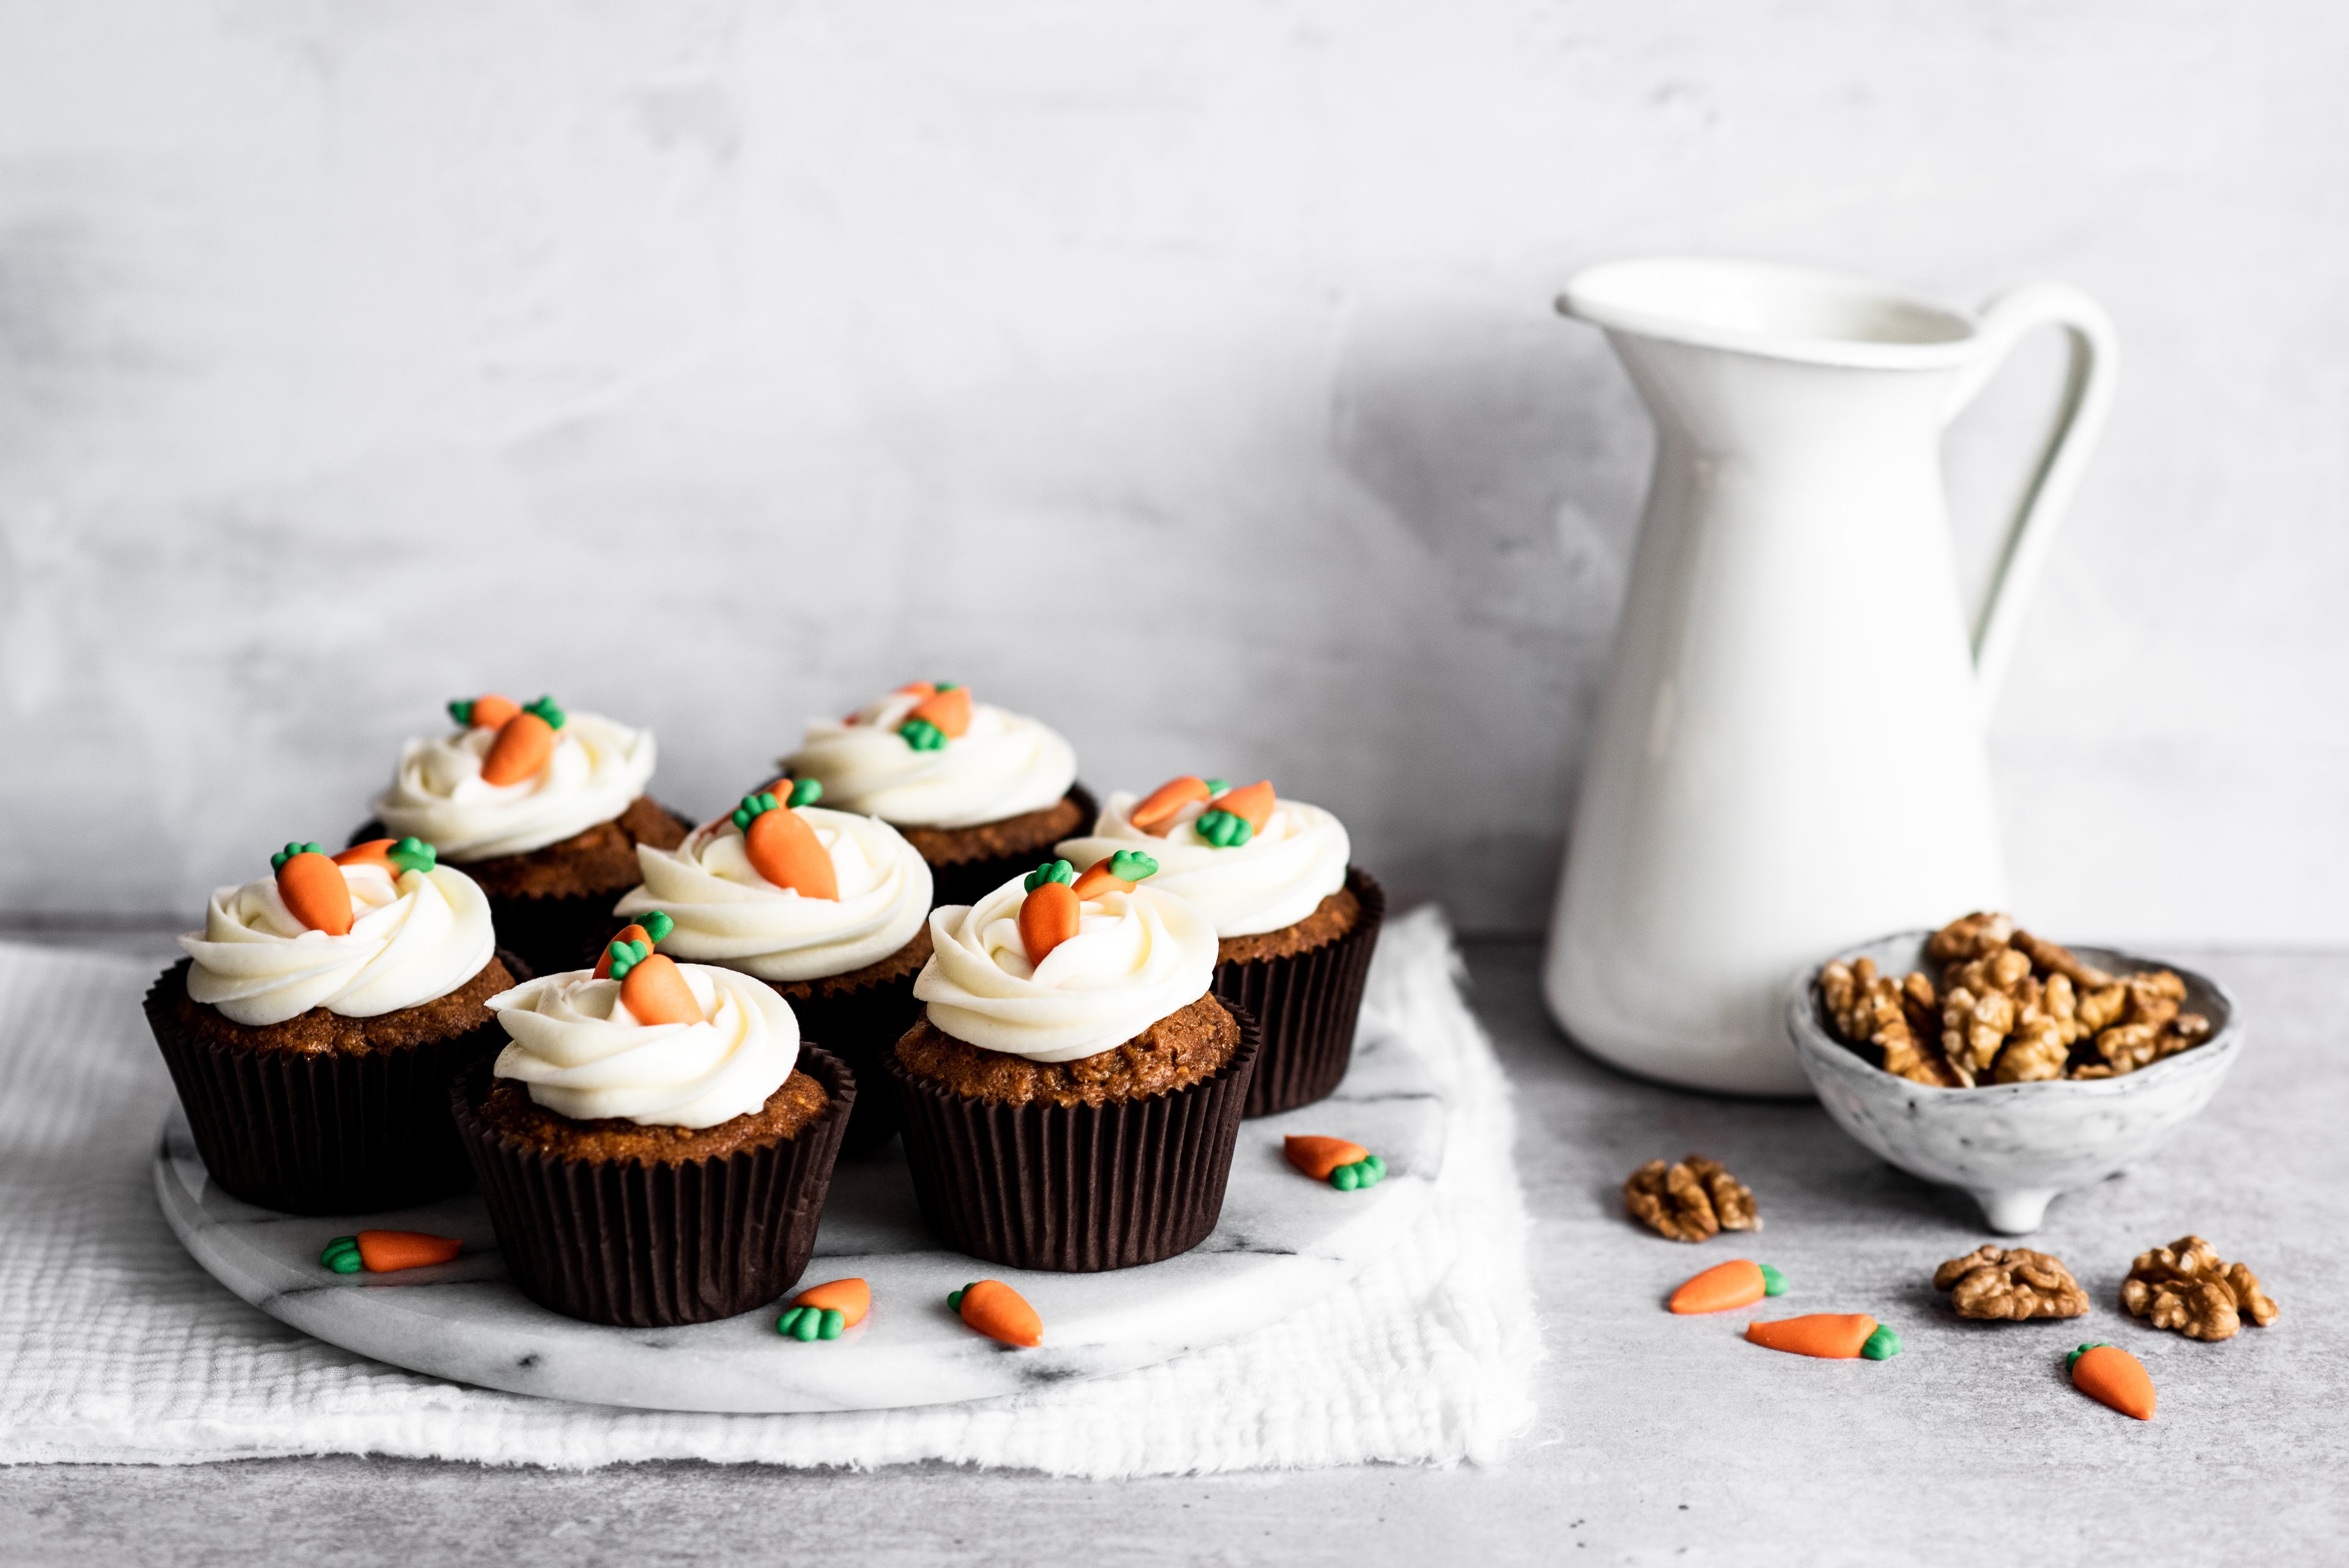 Carrot cake cupcakes with cream cheese icing and carrot decorations